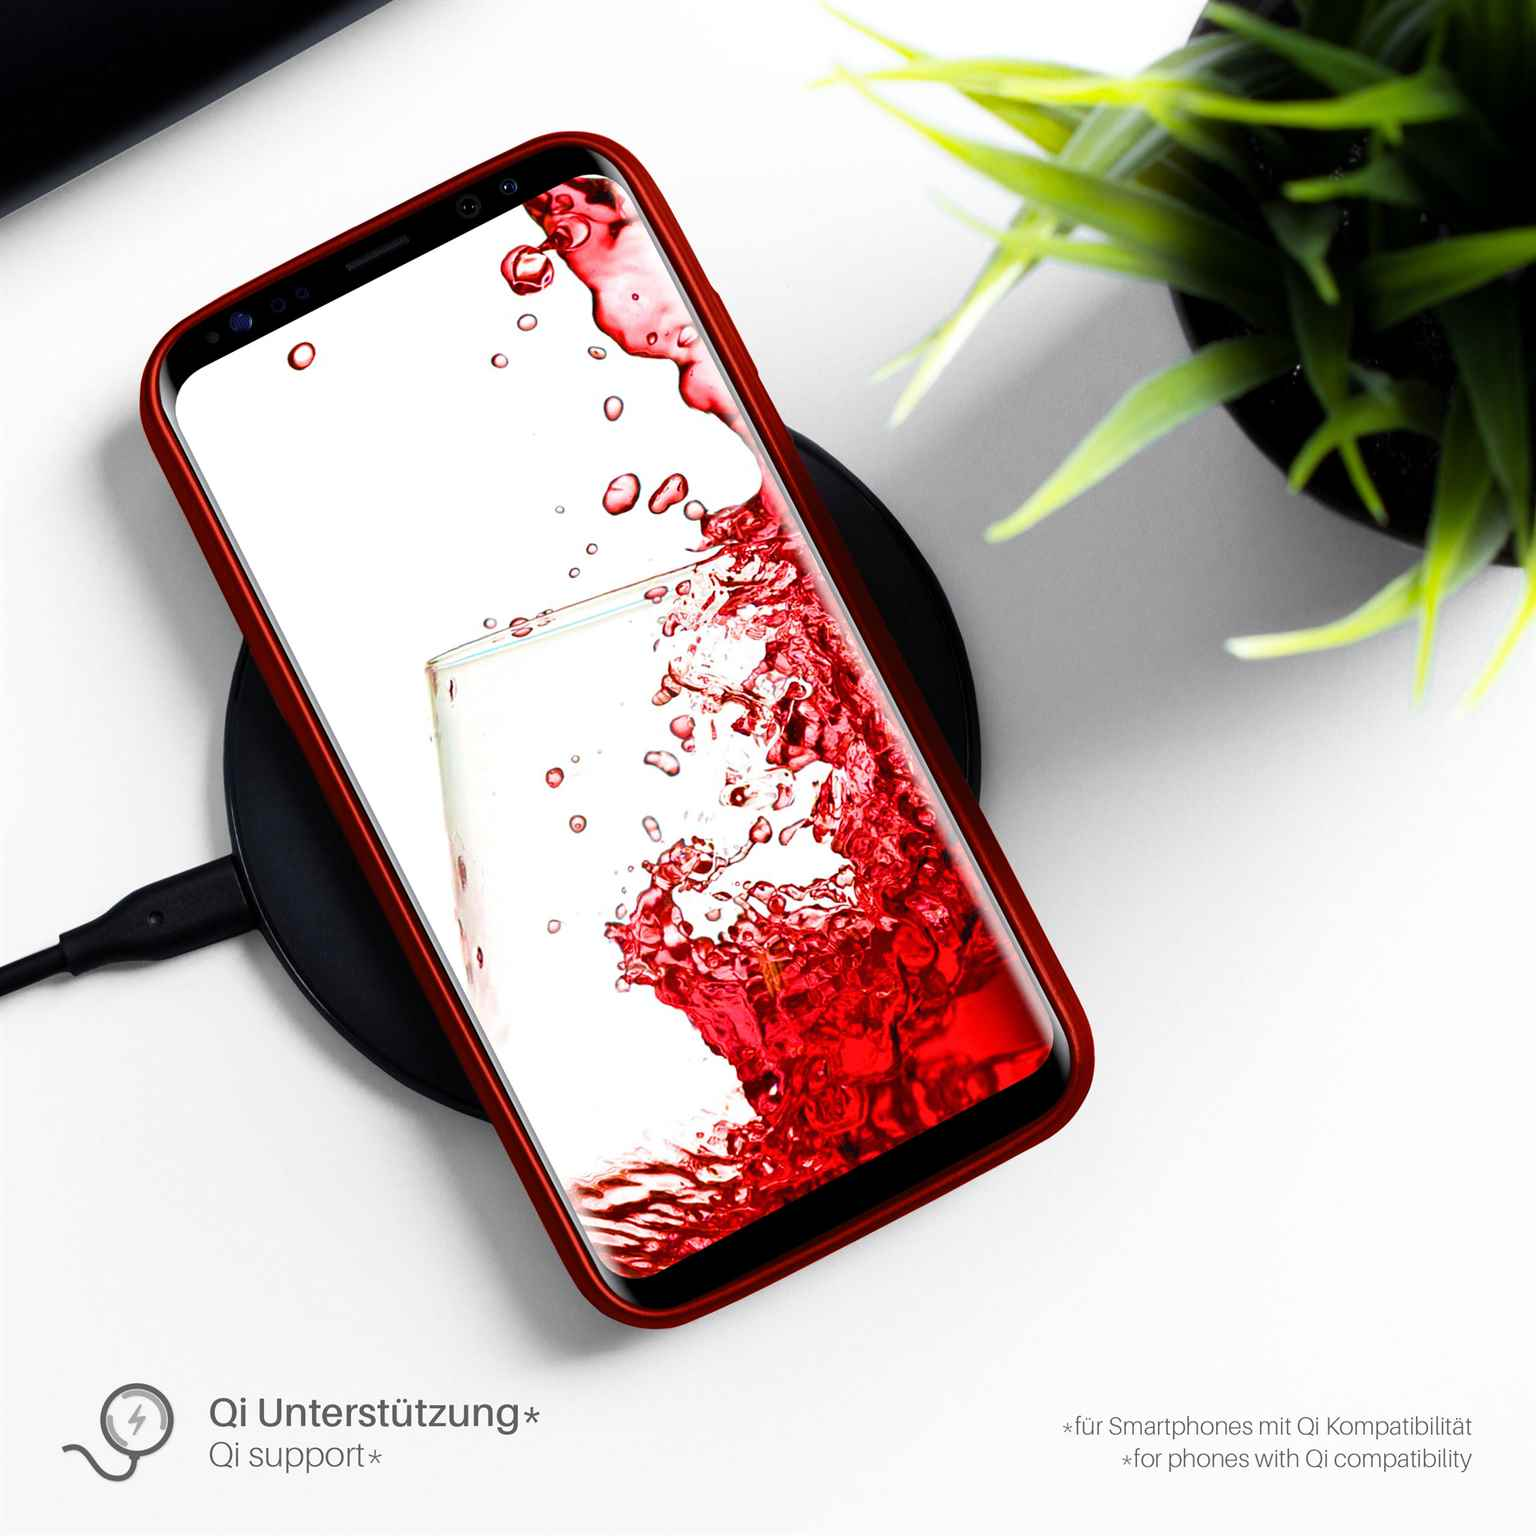 MOEX Crimson-Red Brushed Mini, Samsung, S5 Galaxy Backcover, Case,